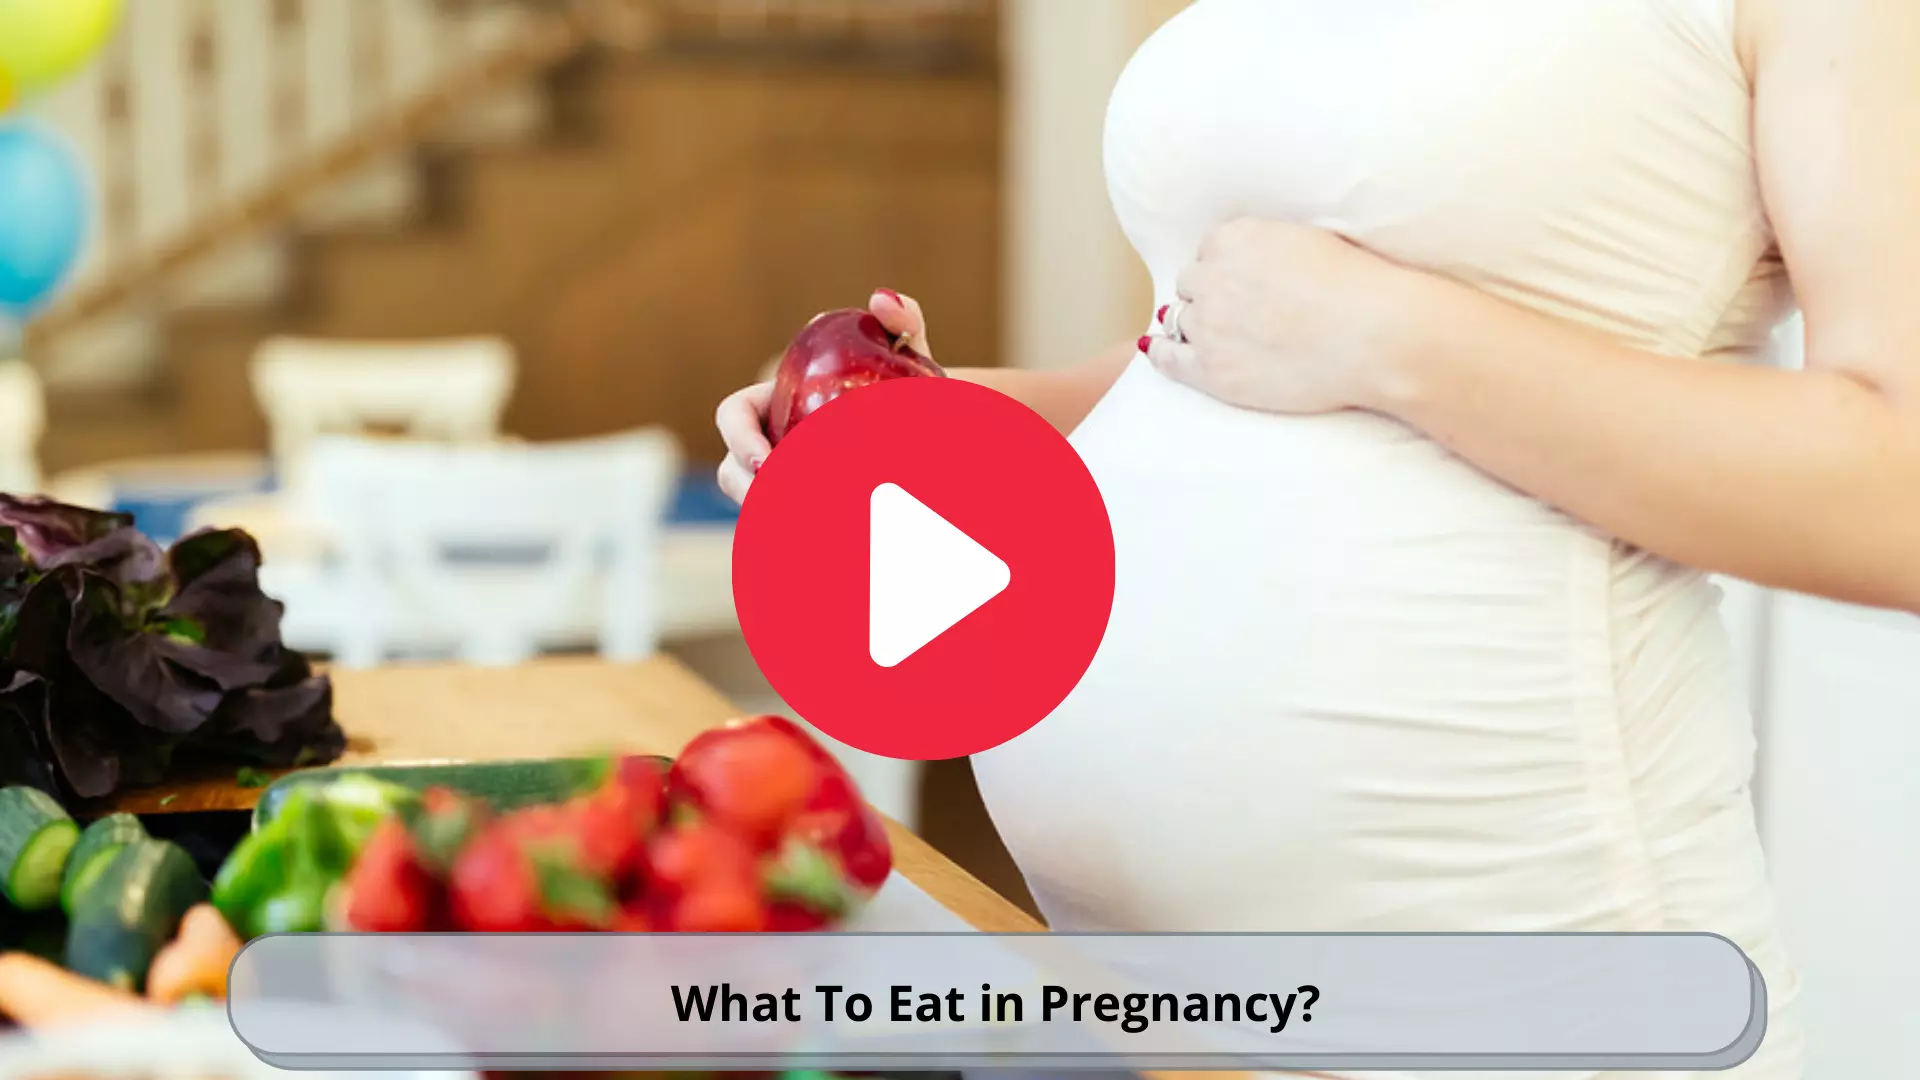 What To Eat During Pregnancy?